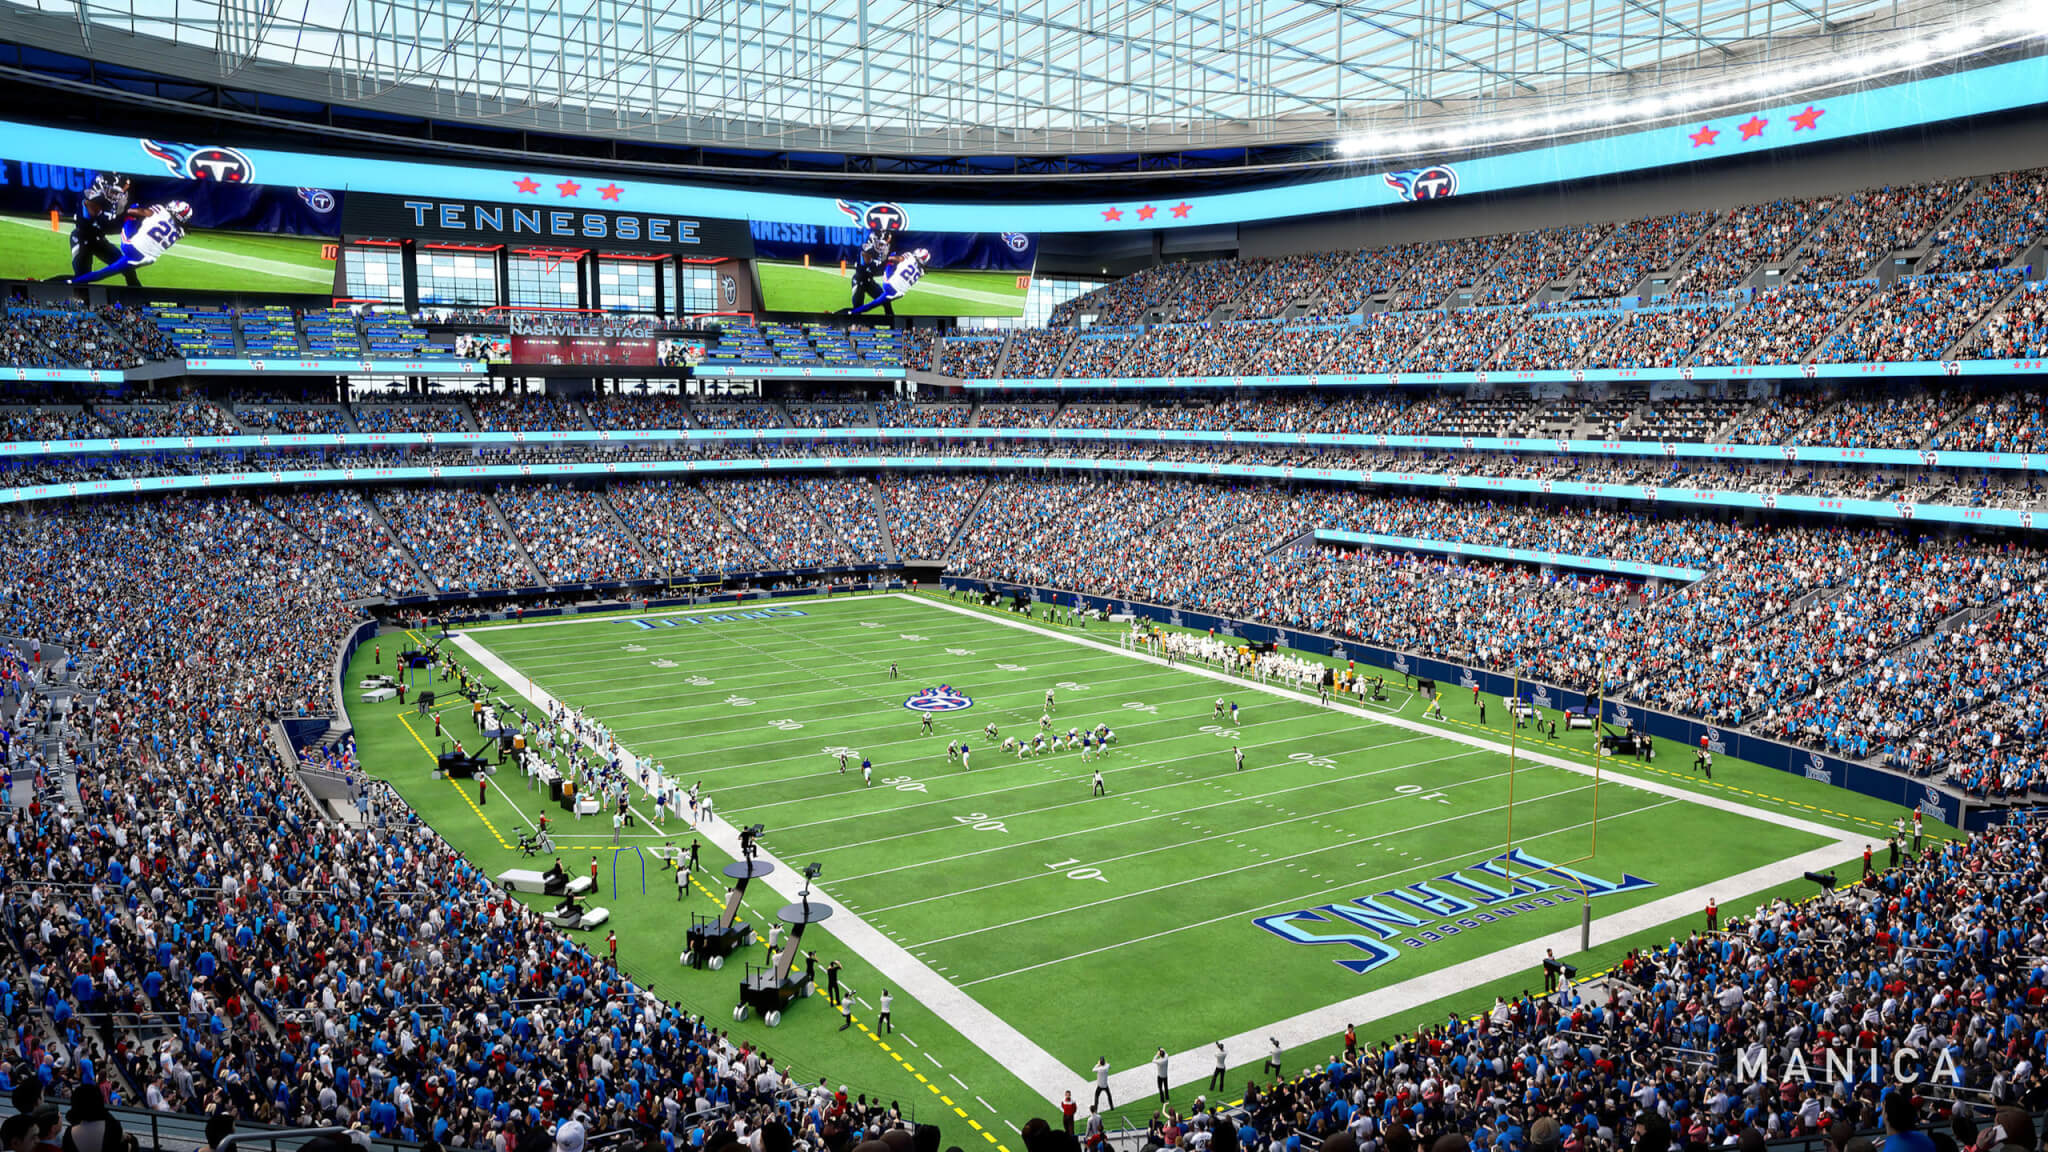 proposed new stadium interior showing field and seating